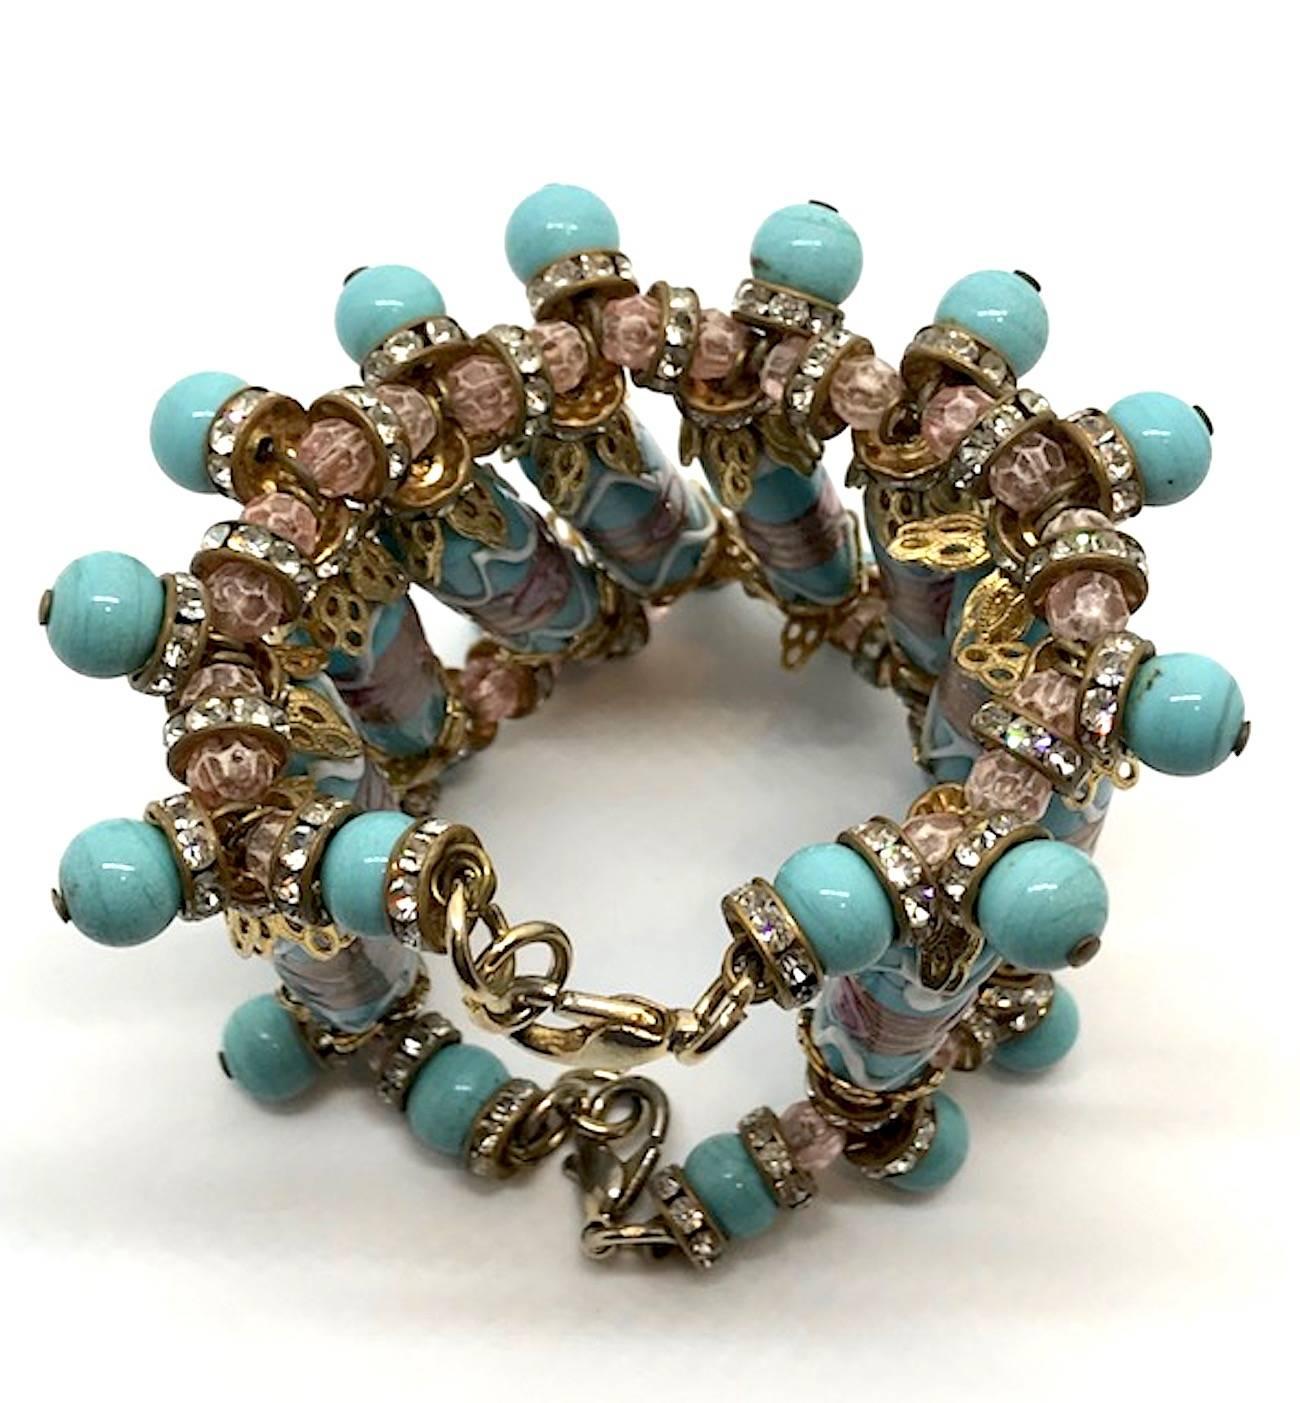 Impressive Italian Venetian glass bead and rhinestone rondelle bracelet. Hand made turquoise and iridescent copper color glass with rose central design on the long tube beads capped by gold filigree ends. Turquoise glass bead dangle surround the top